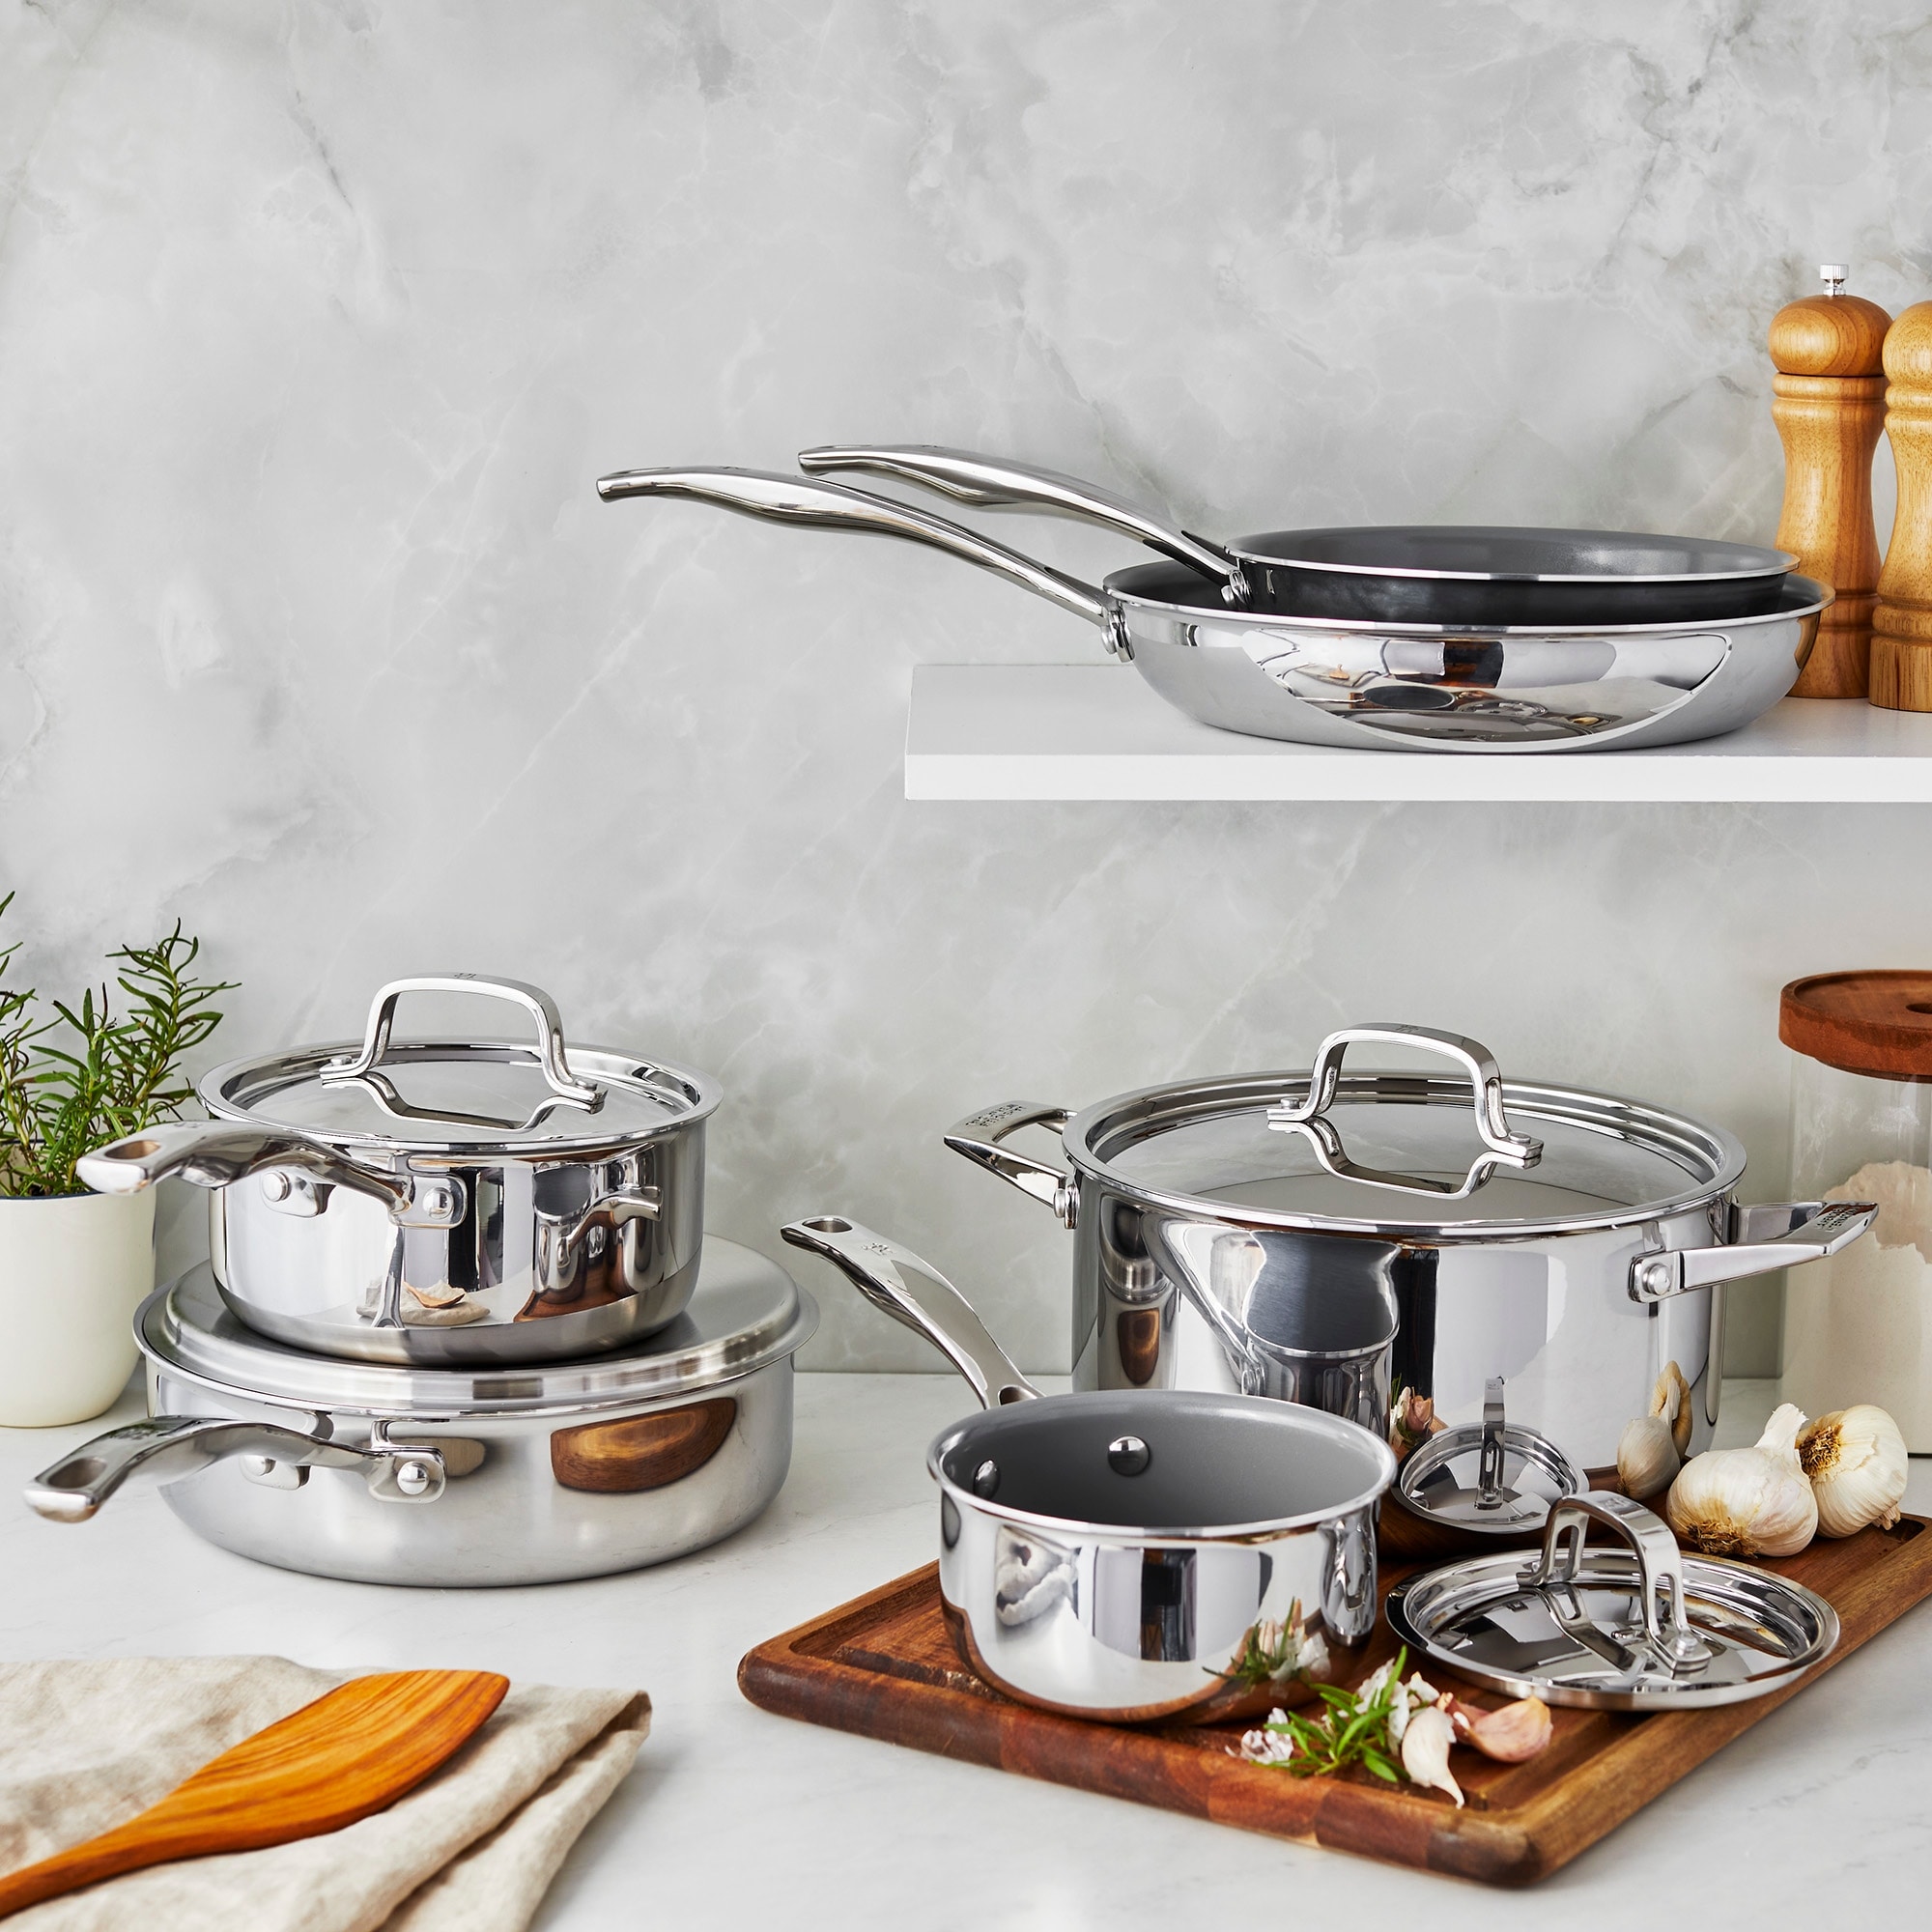 https://ak1.ostkcdn.com/images/products/is/images/direct/31f88cebce49fd19c6a2c5eae72eb45e6c3c6232/Henckels-Clad-Alliance-10-pc-Stainless-Steel-Cookware-Set.jpg